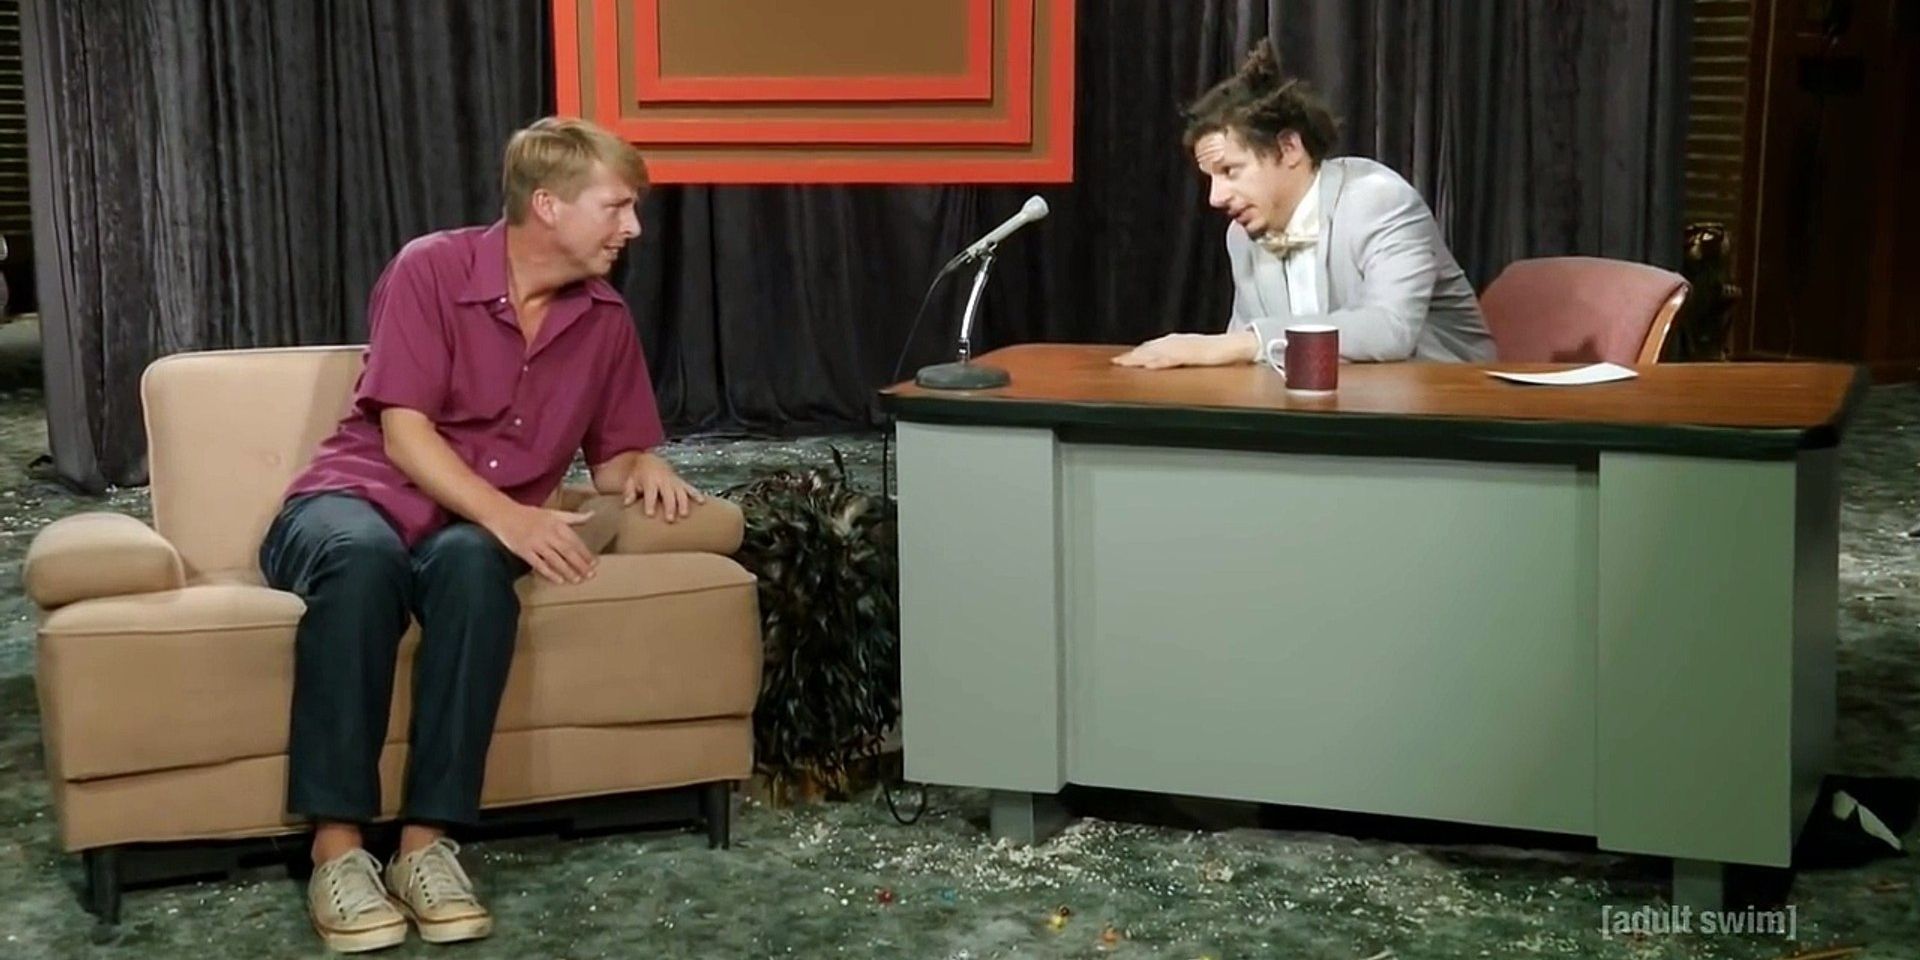 Eric Andre interviews Jack McBrayer on The Eric Andre Show